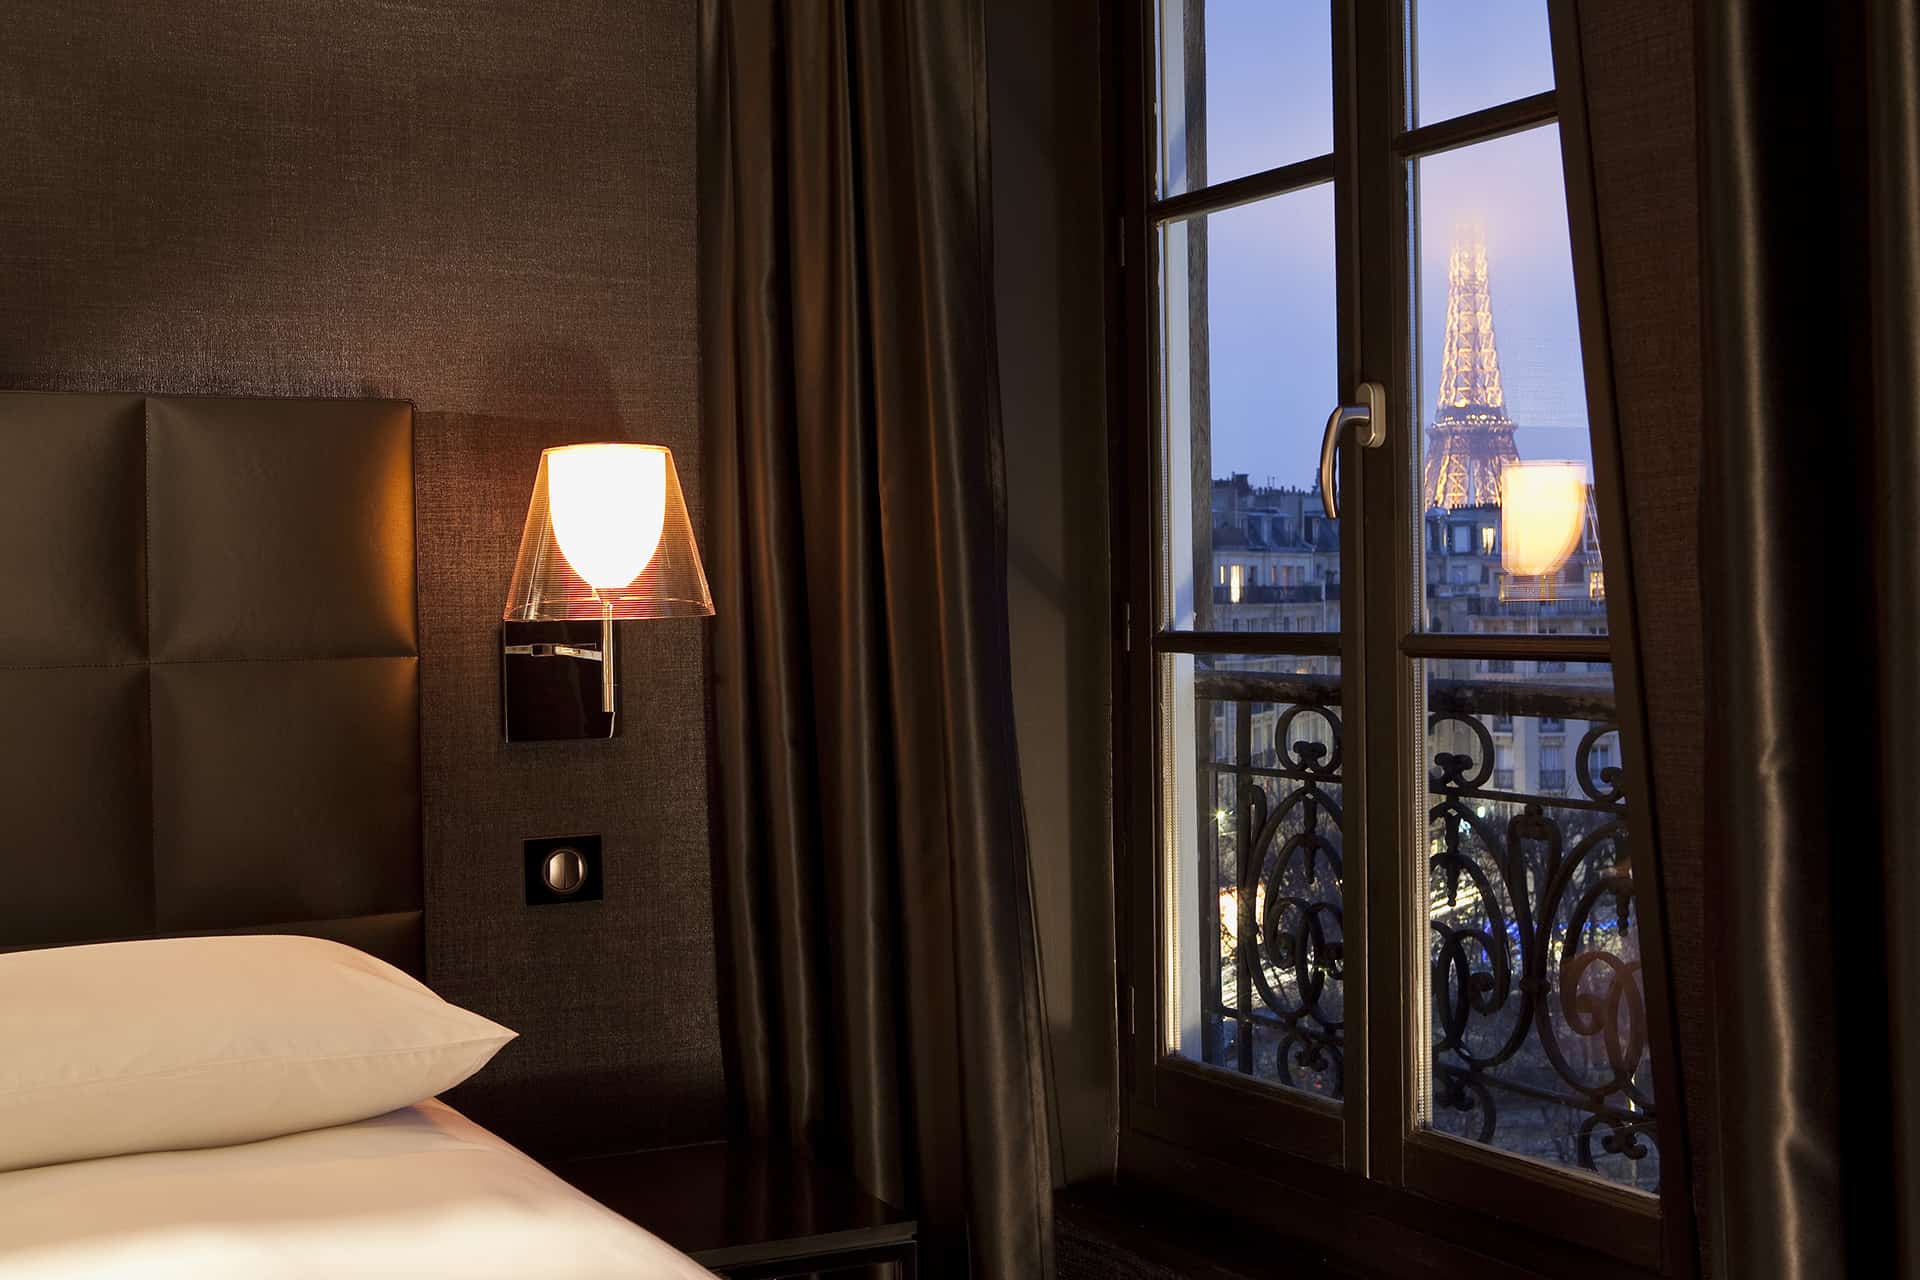 First Hotel Paris offers balcony Eiffel Tower views. The room is decorated in dark browns and looks cozy and comfortable. 